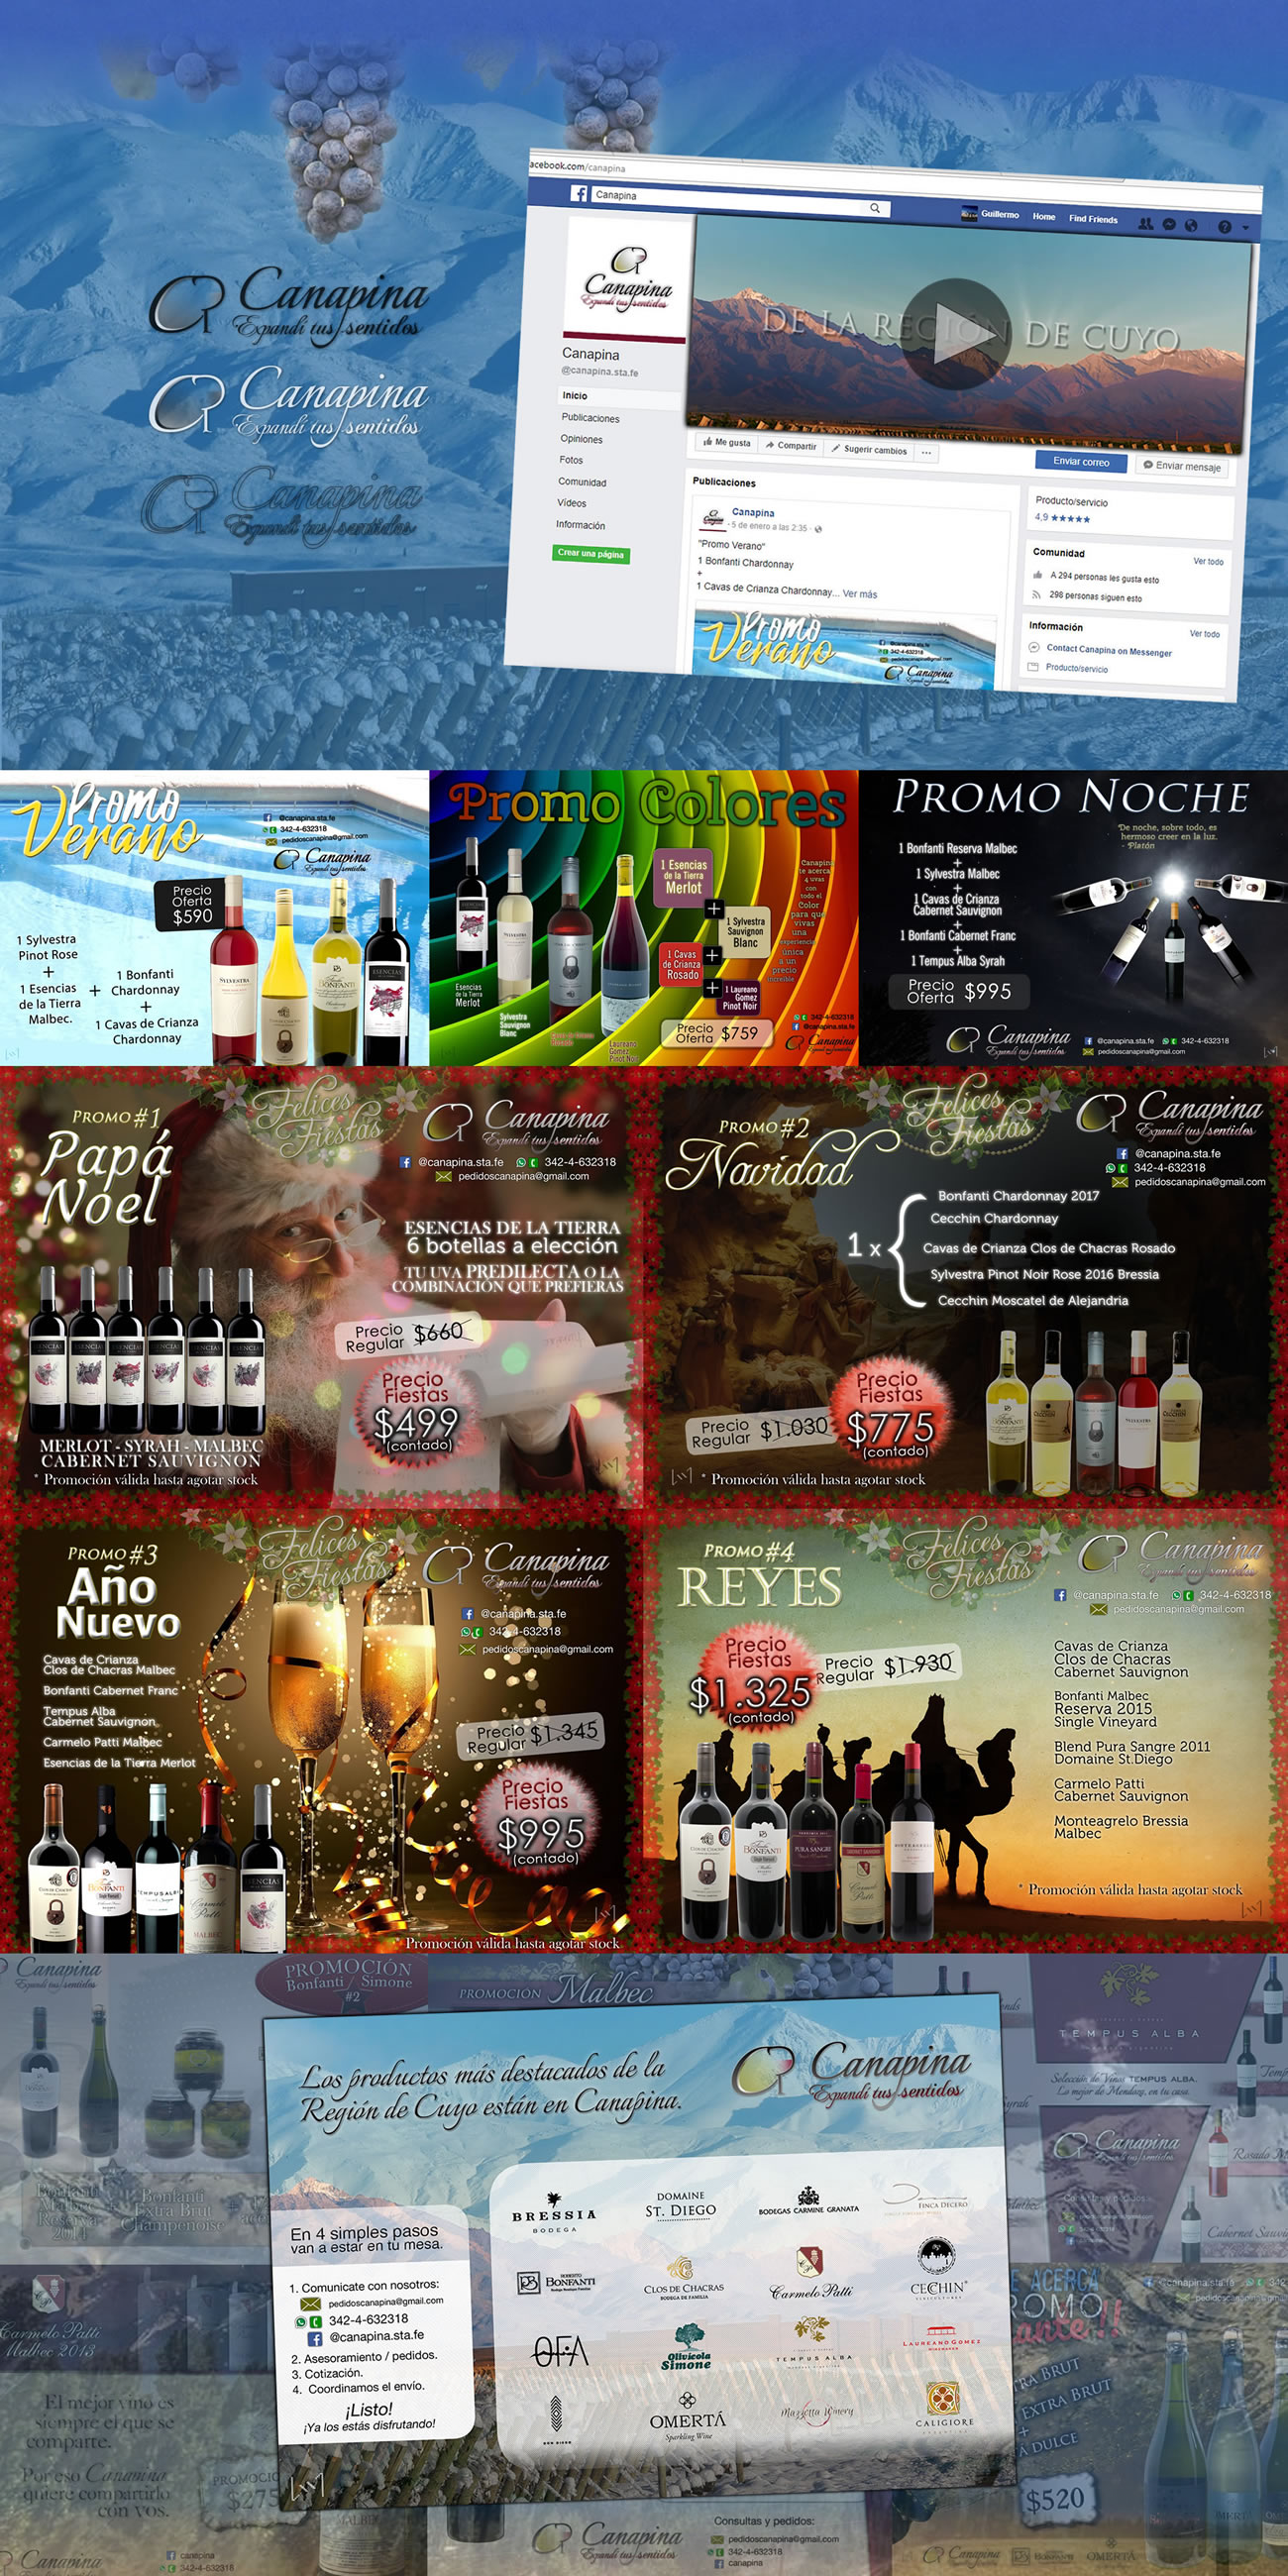 Image of Canapina | Brochures, Flyers, Brand, Social networks